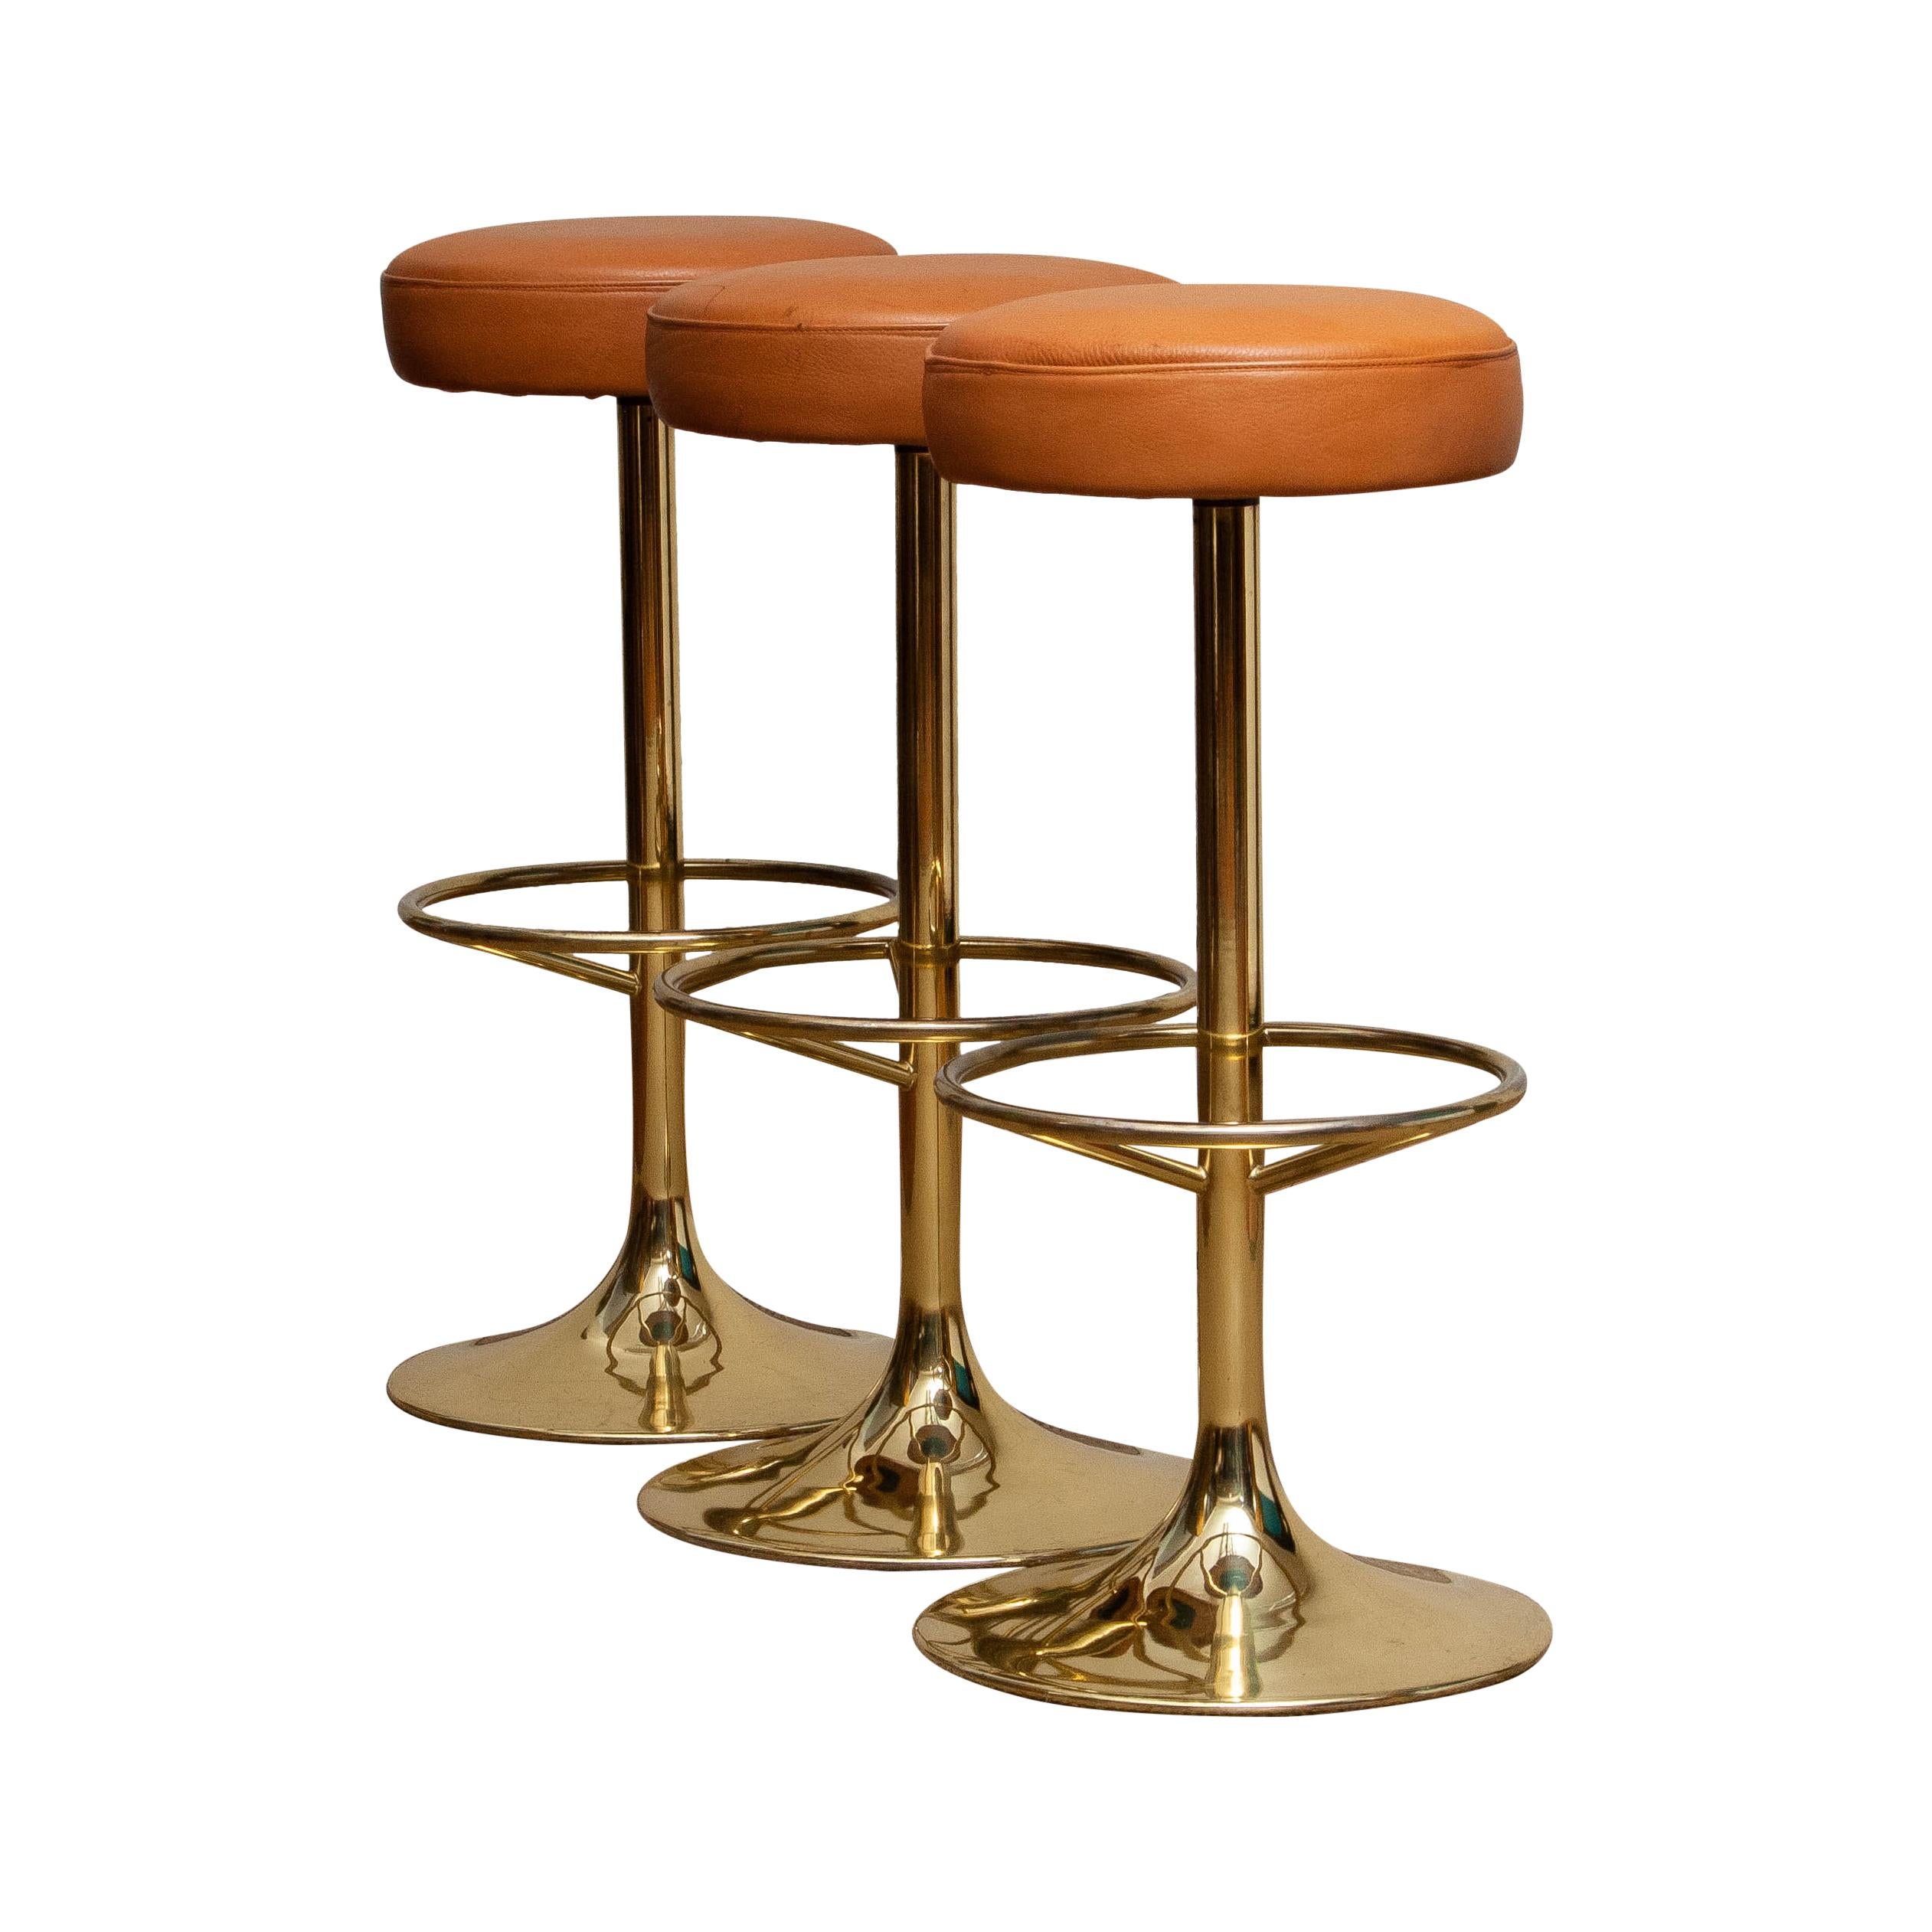 1970s, Set of Three Bar Stools in Brass / Gold by Johanson Design for Markaryd